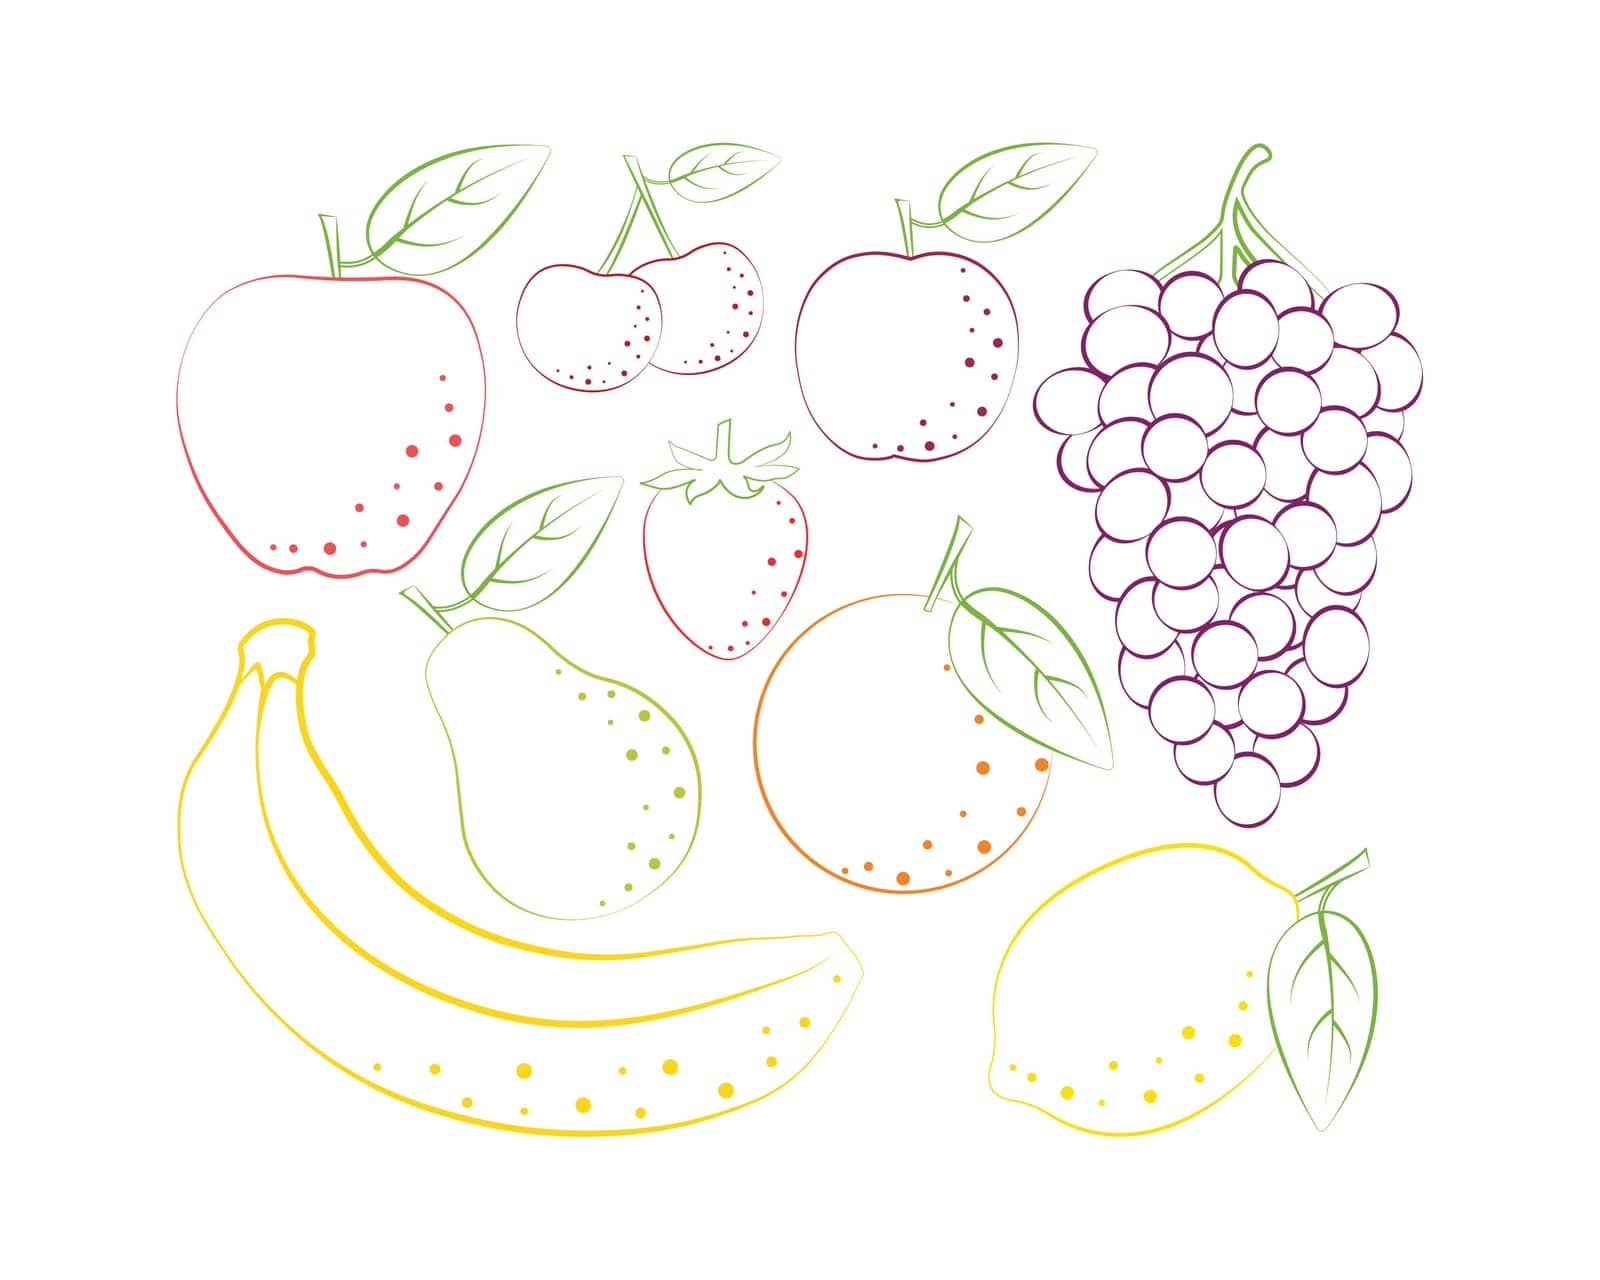 Fruit coloring book. Children coloring book featuring fruits such as apple, plum, cherry and strawberry, as well as grapes, pears and bananas. Tropical fruits coloring book. Banana, orange and lemon.